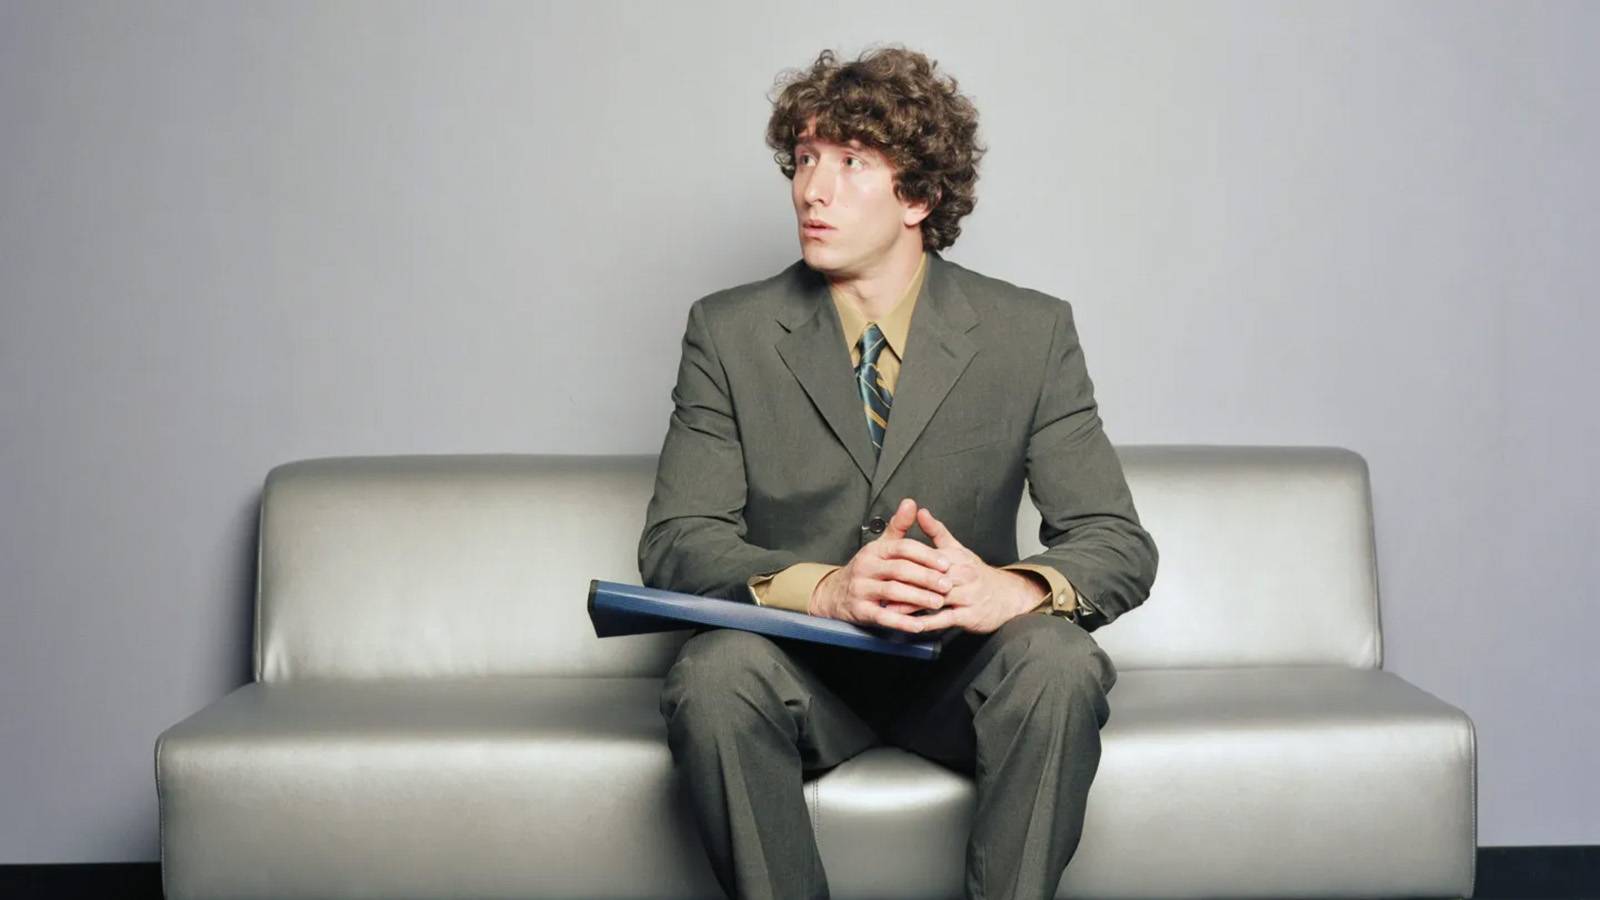 Young businessman in suit seated on couch awaiting interview